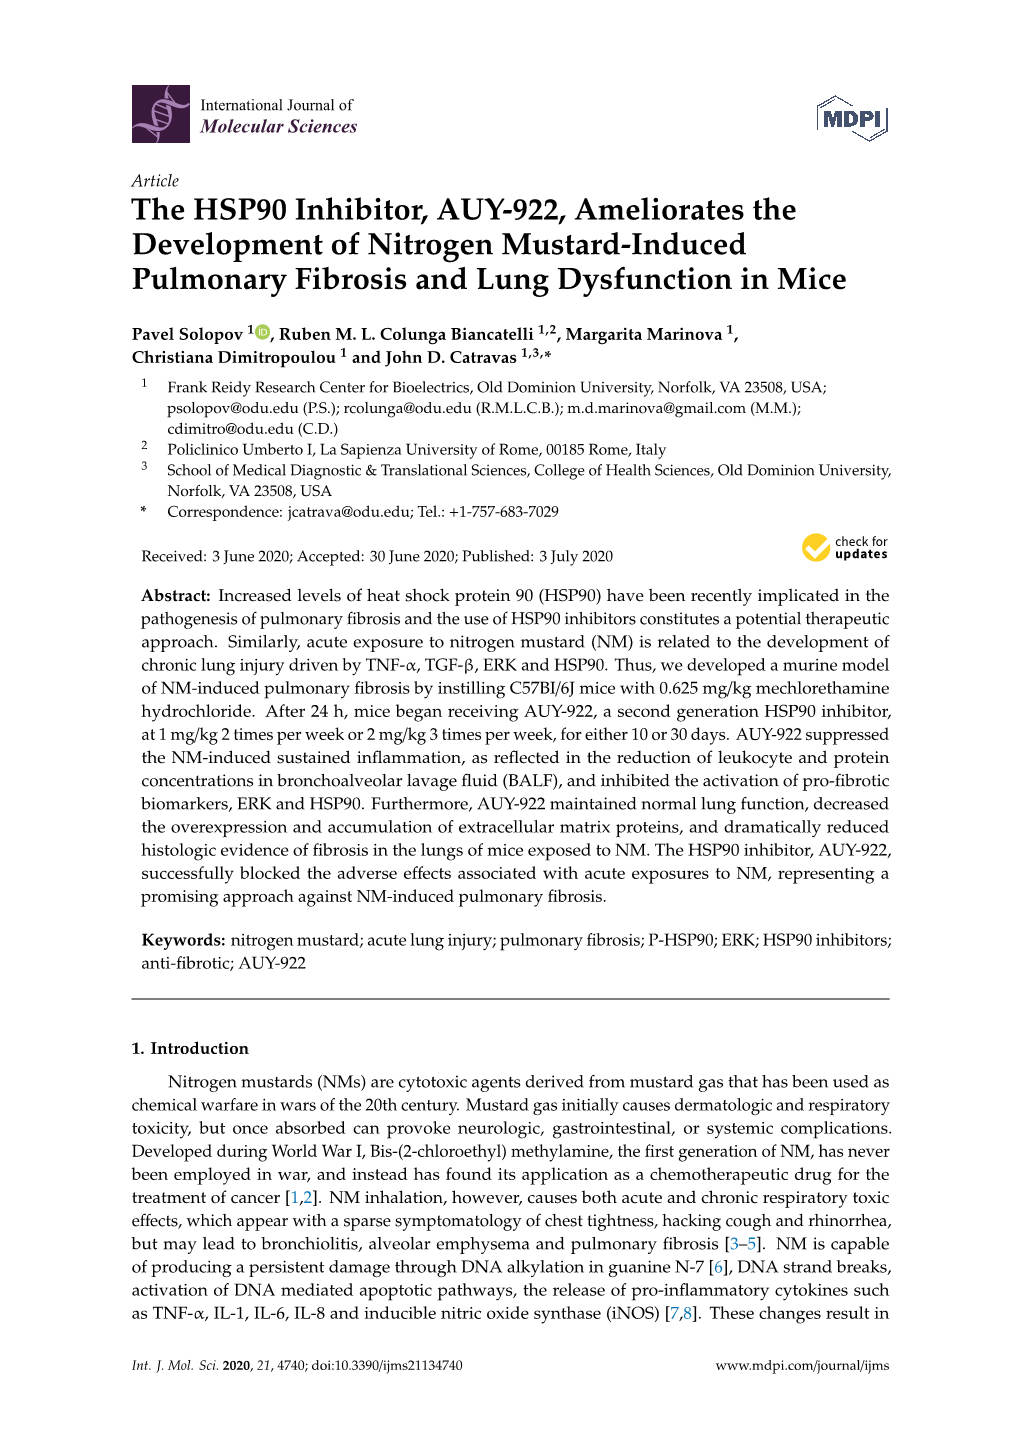 The HSP90 Inhibitor, AUY-922, Ameliorates the Development of Nitrogen Mustard-Induced Pulmonary Fibrosis and Lung Dysfunction in Mice